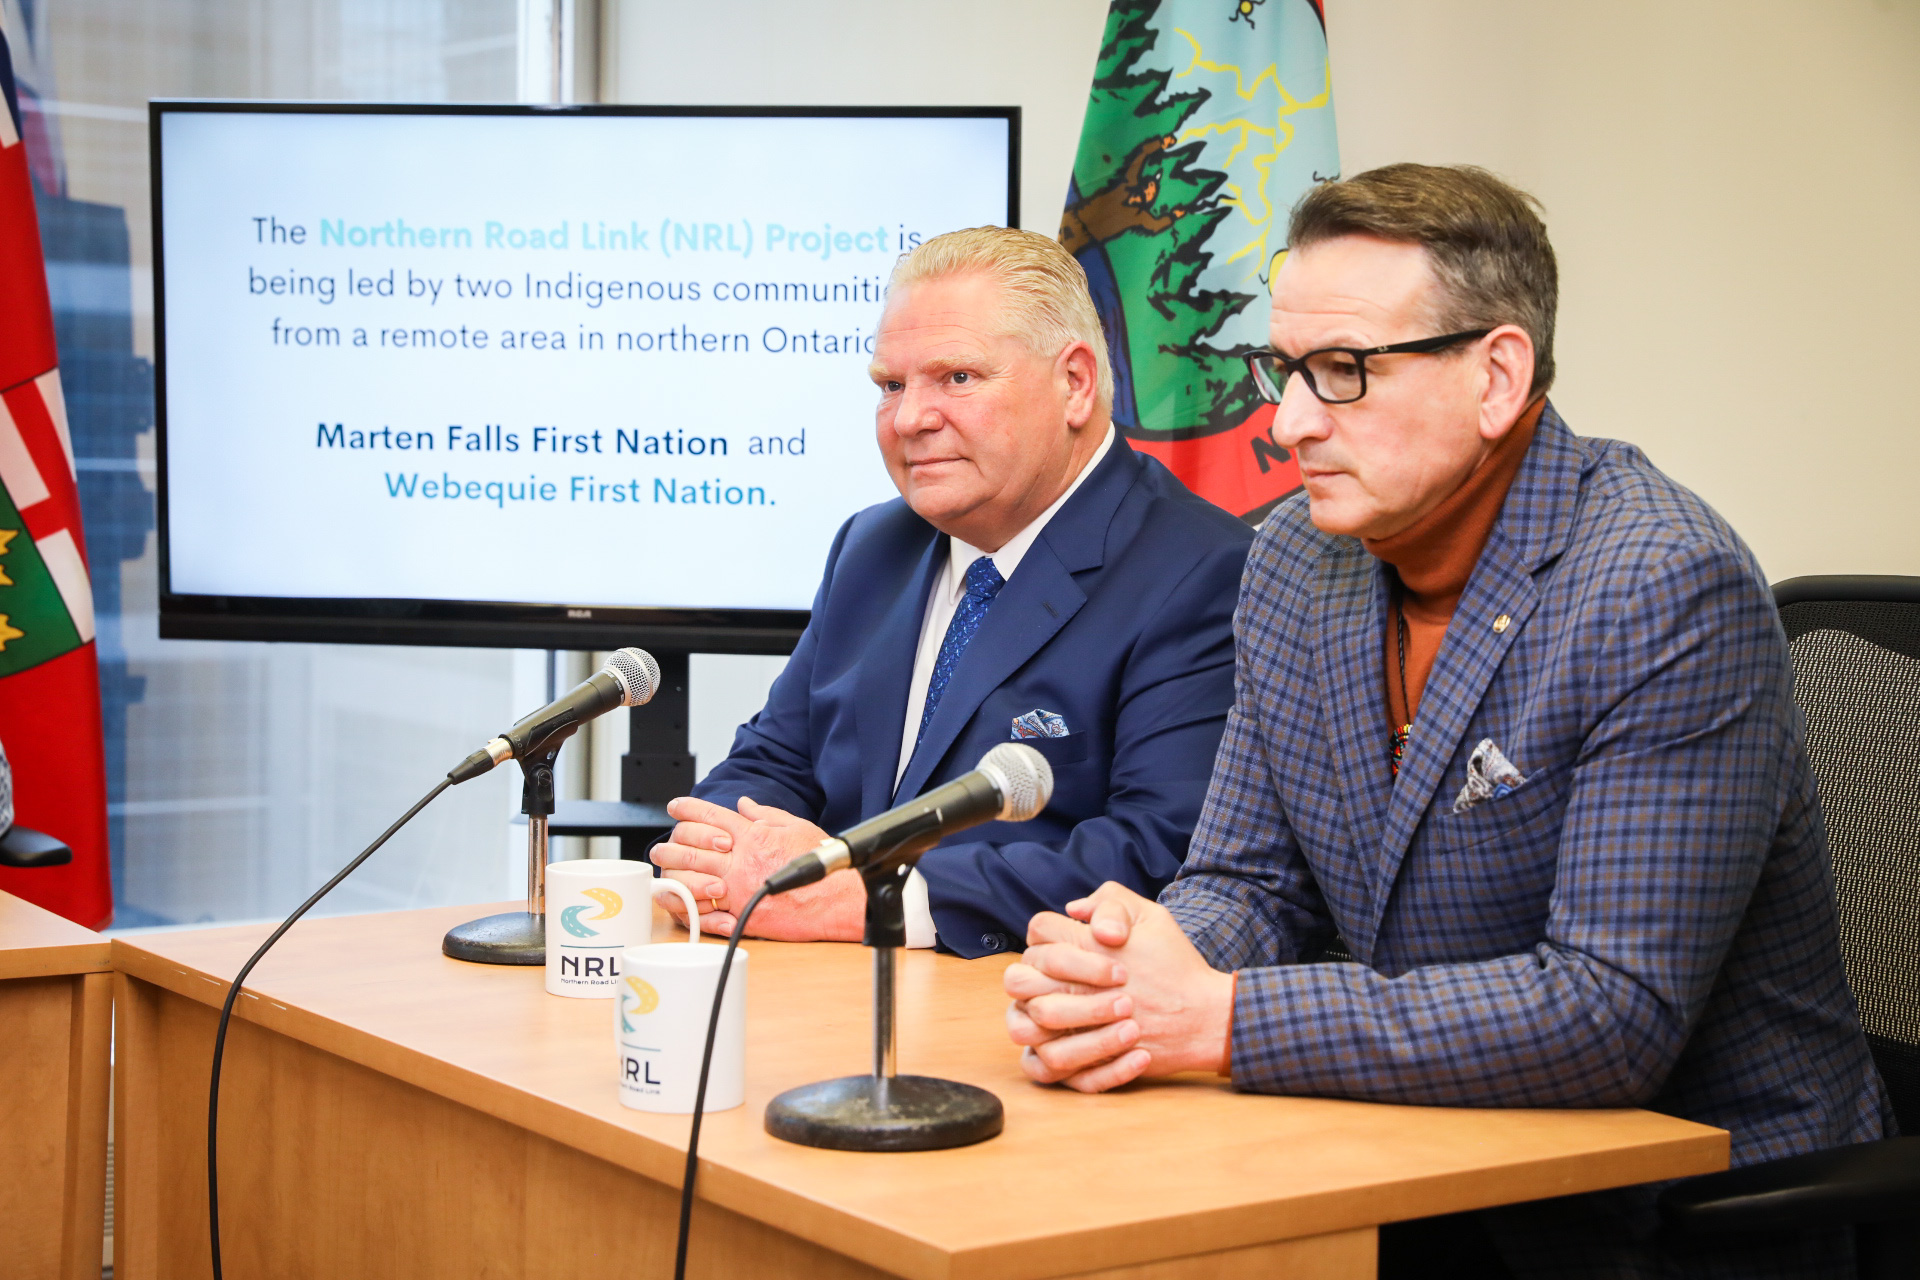 Ontario Premier Doug Ford and Minister of Northern Development, Mines, Natural Resources and Forestry Greg Rickford sit at a table with microphones in front of them, both wearing suits, as they discuss a road for Ontario's Ring of Fire region.